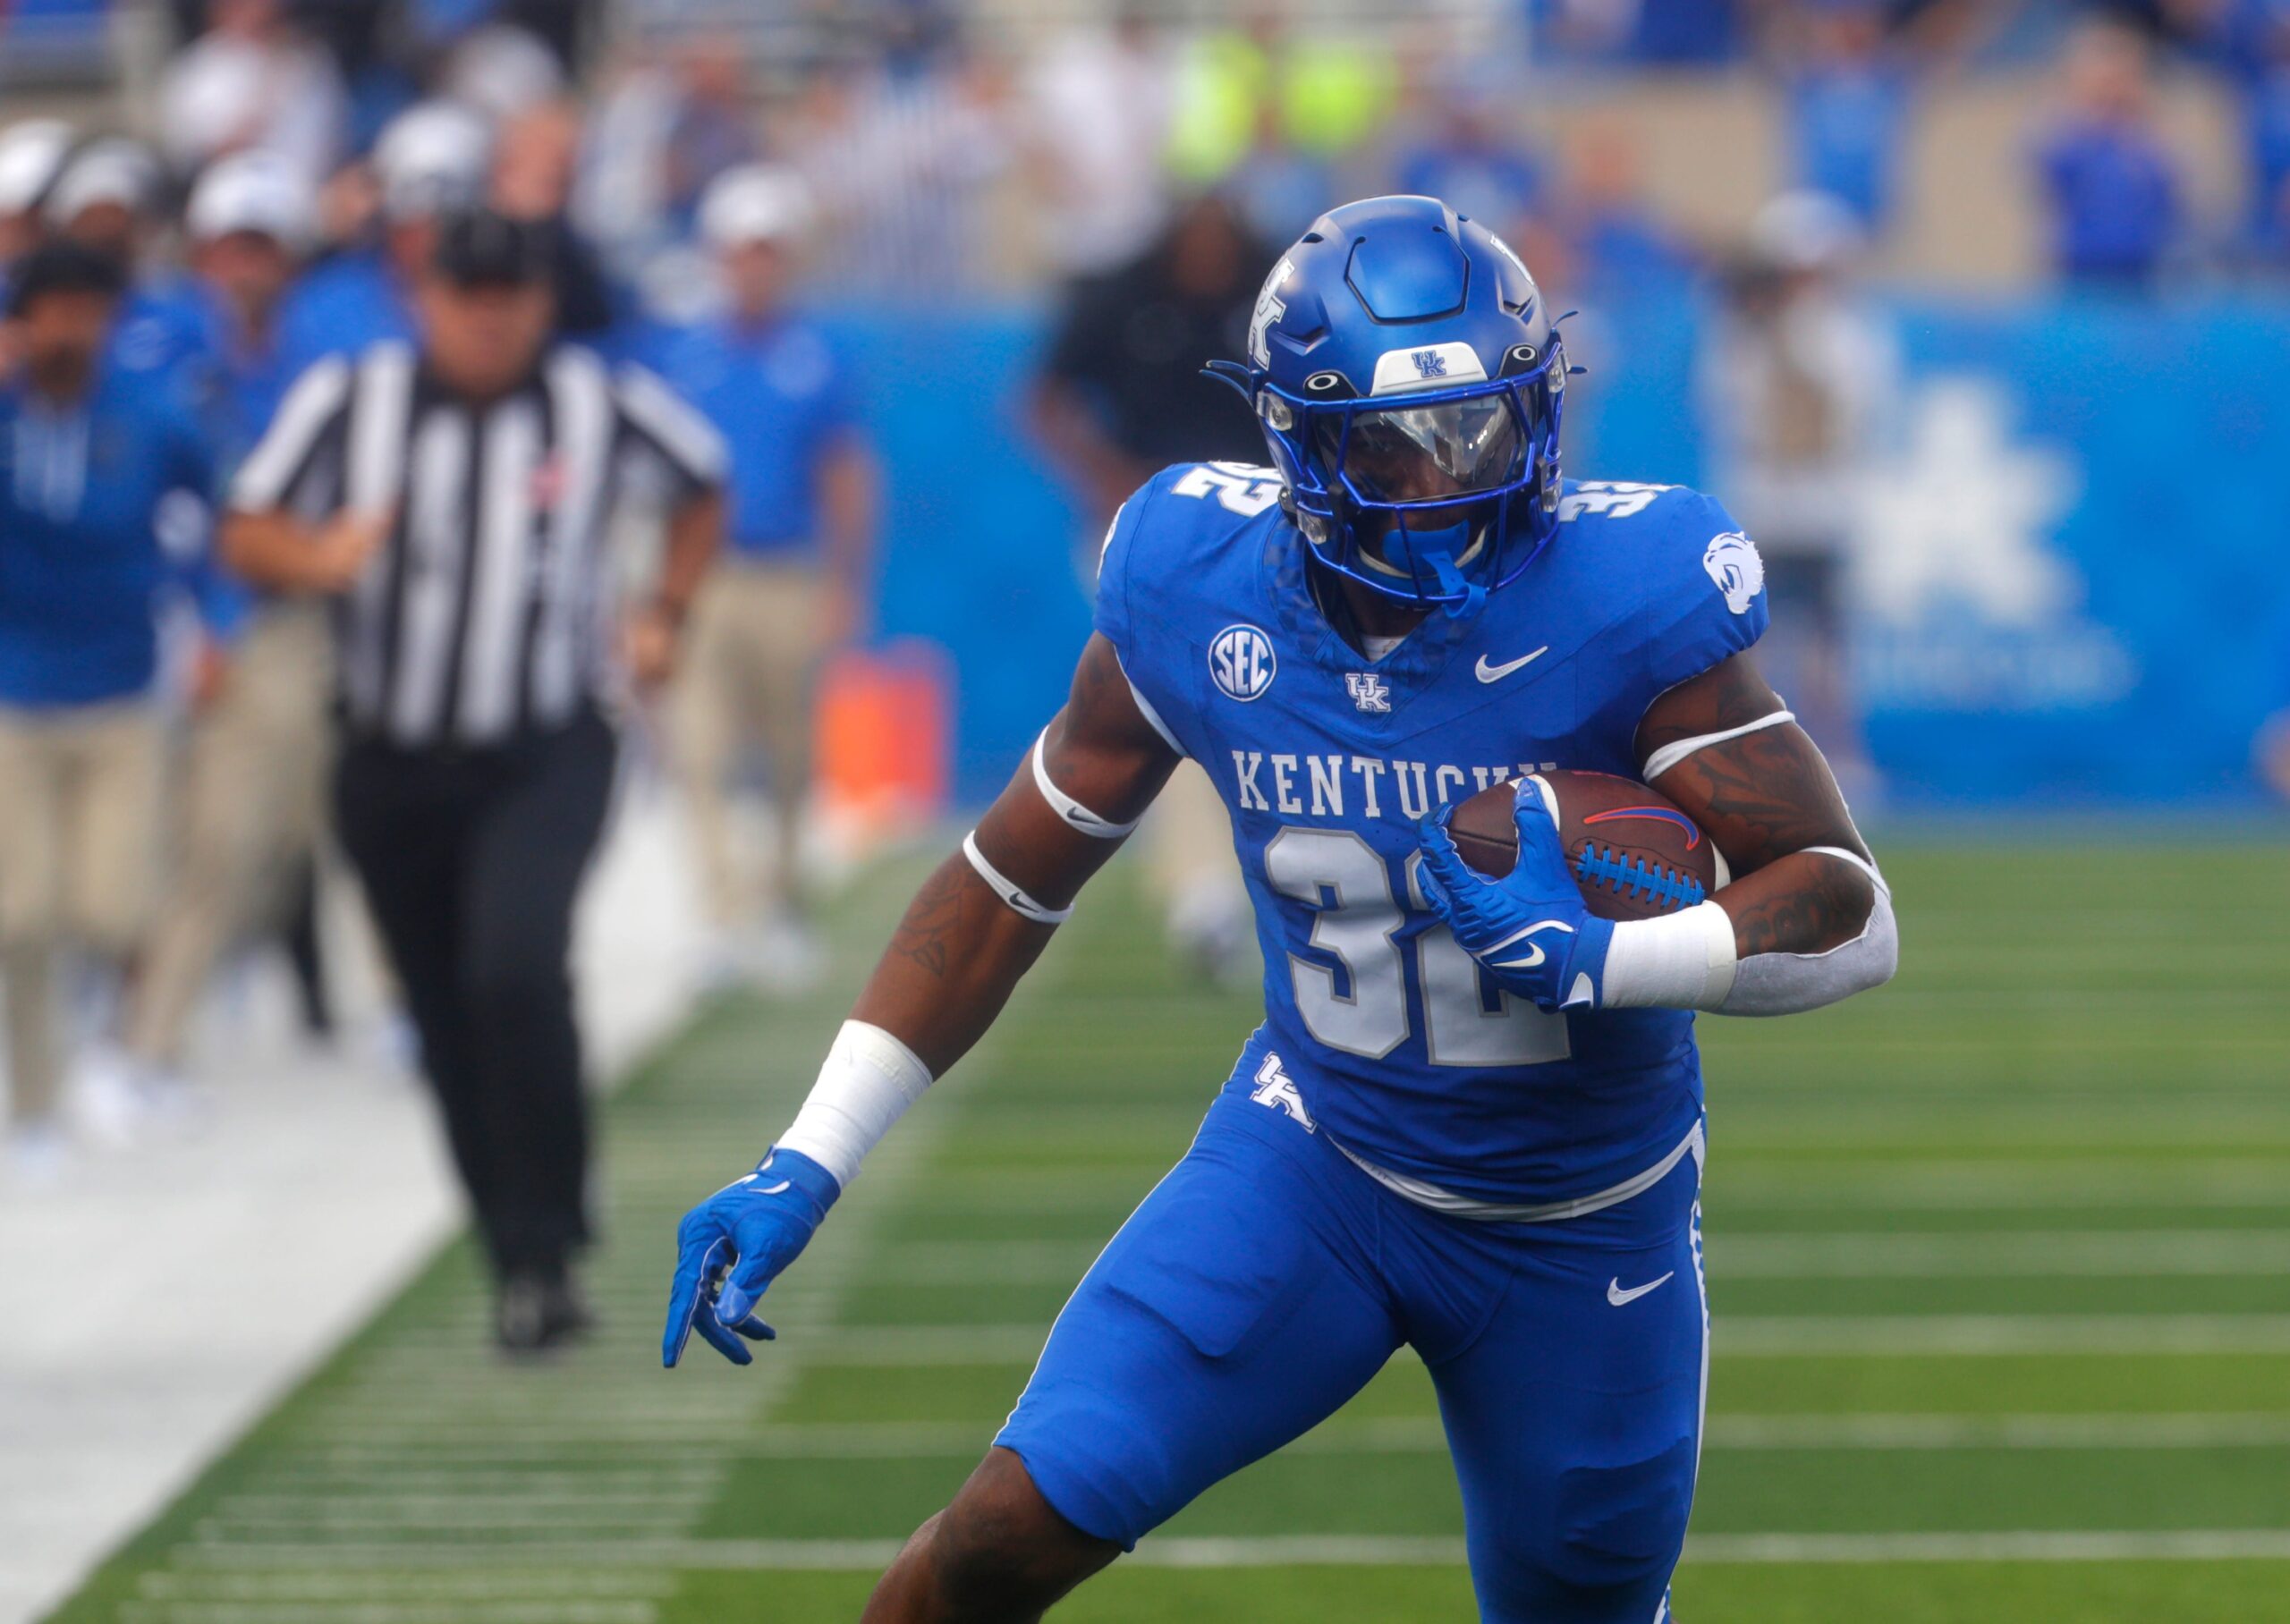 trevin-wallace-draft-profile-kentucky-lb-scouting-report-scaled.jpg